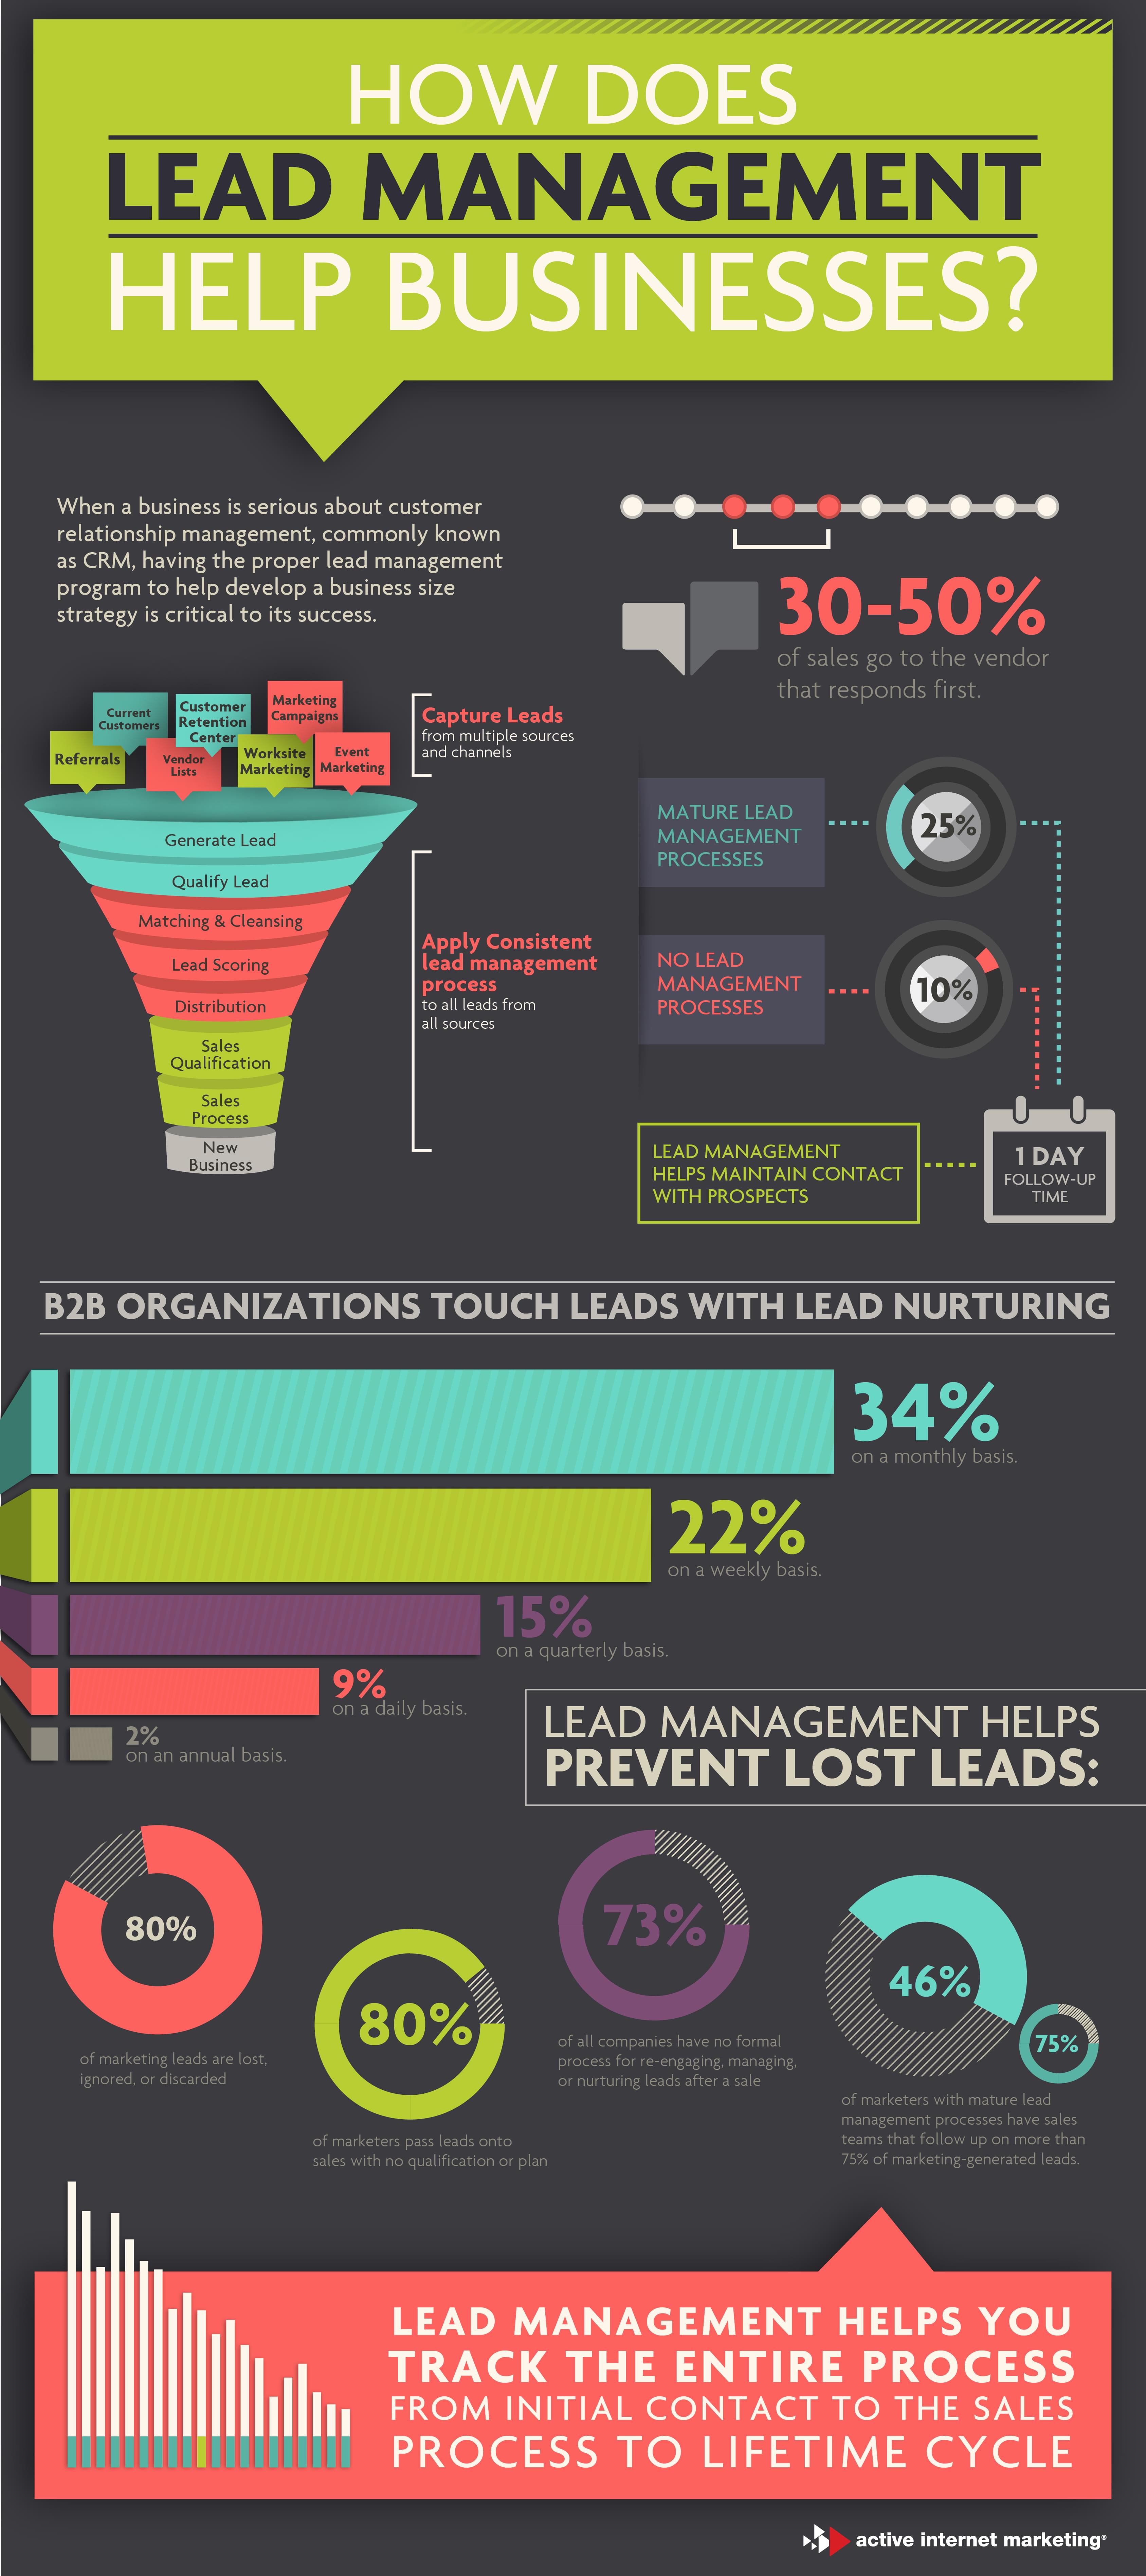 How lead management helps businesses